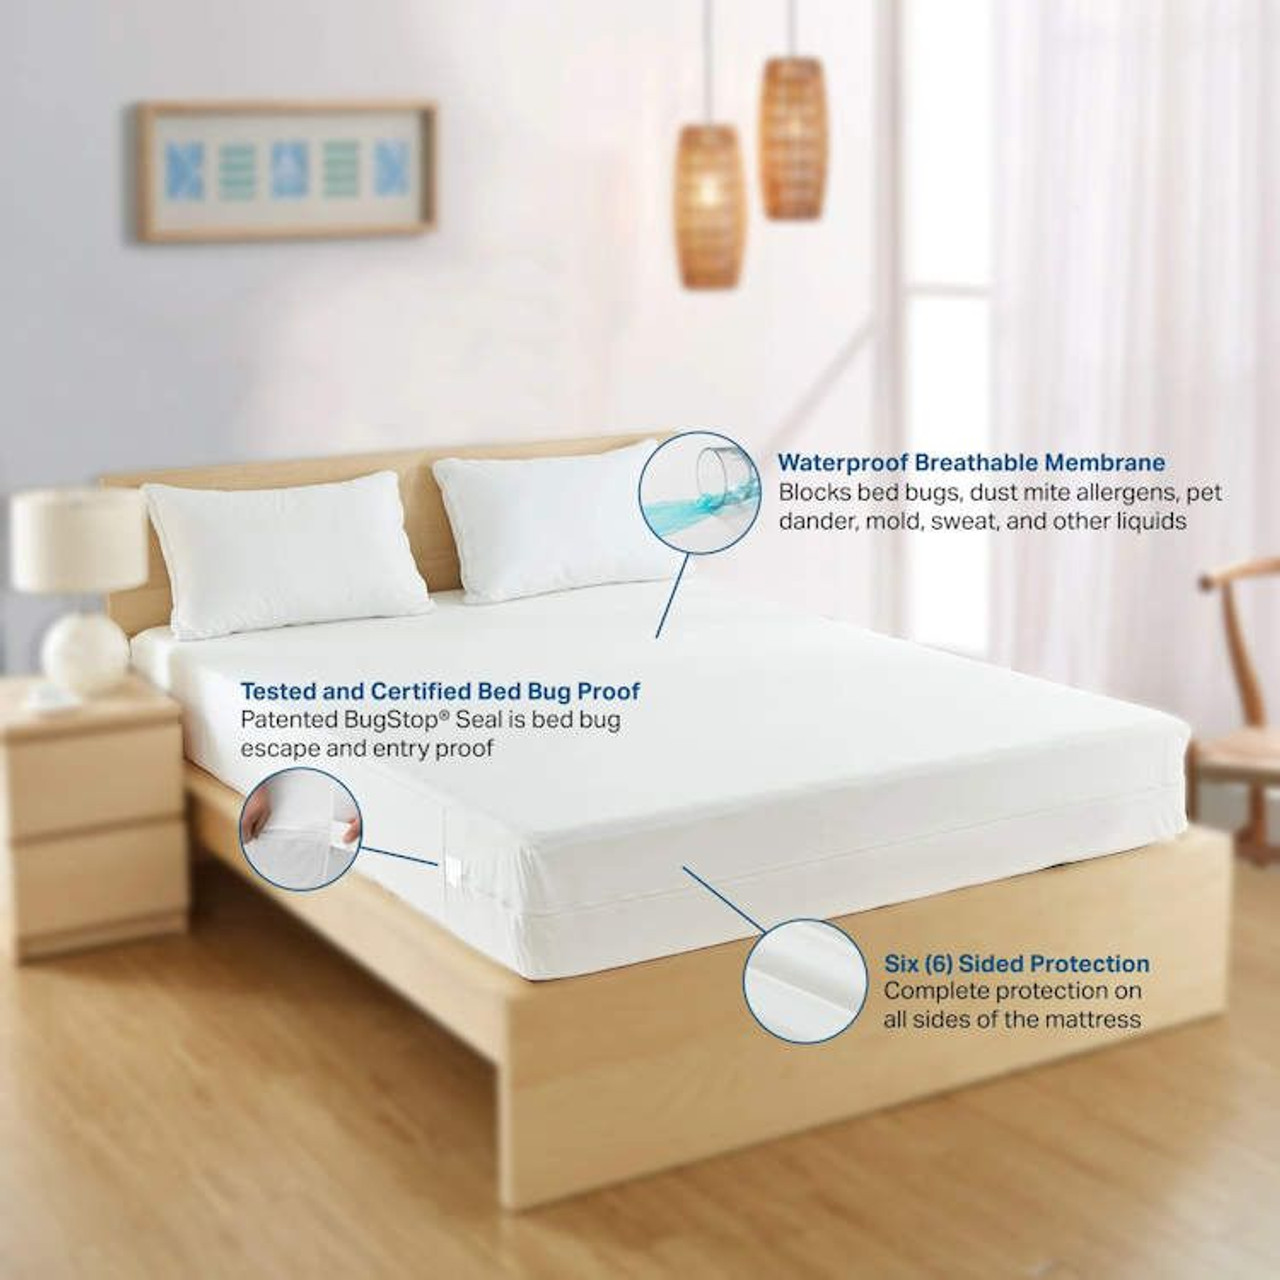 https://cdn11.bigcommerce.com/s-q0oajb576s/images/stencil/1280x1280/products/1039/2887/bedbug-solution-elite-zippered-mattress-covers-bed-bug-proof-waterproof-protection-12__31944.1652211532.jpg?c=1?imbypass=on